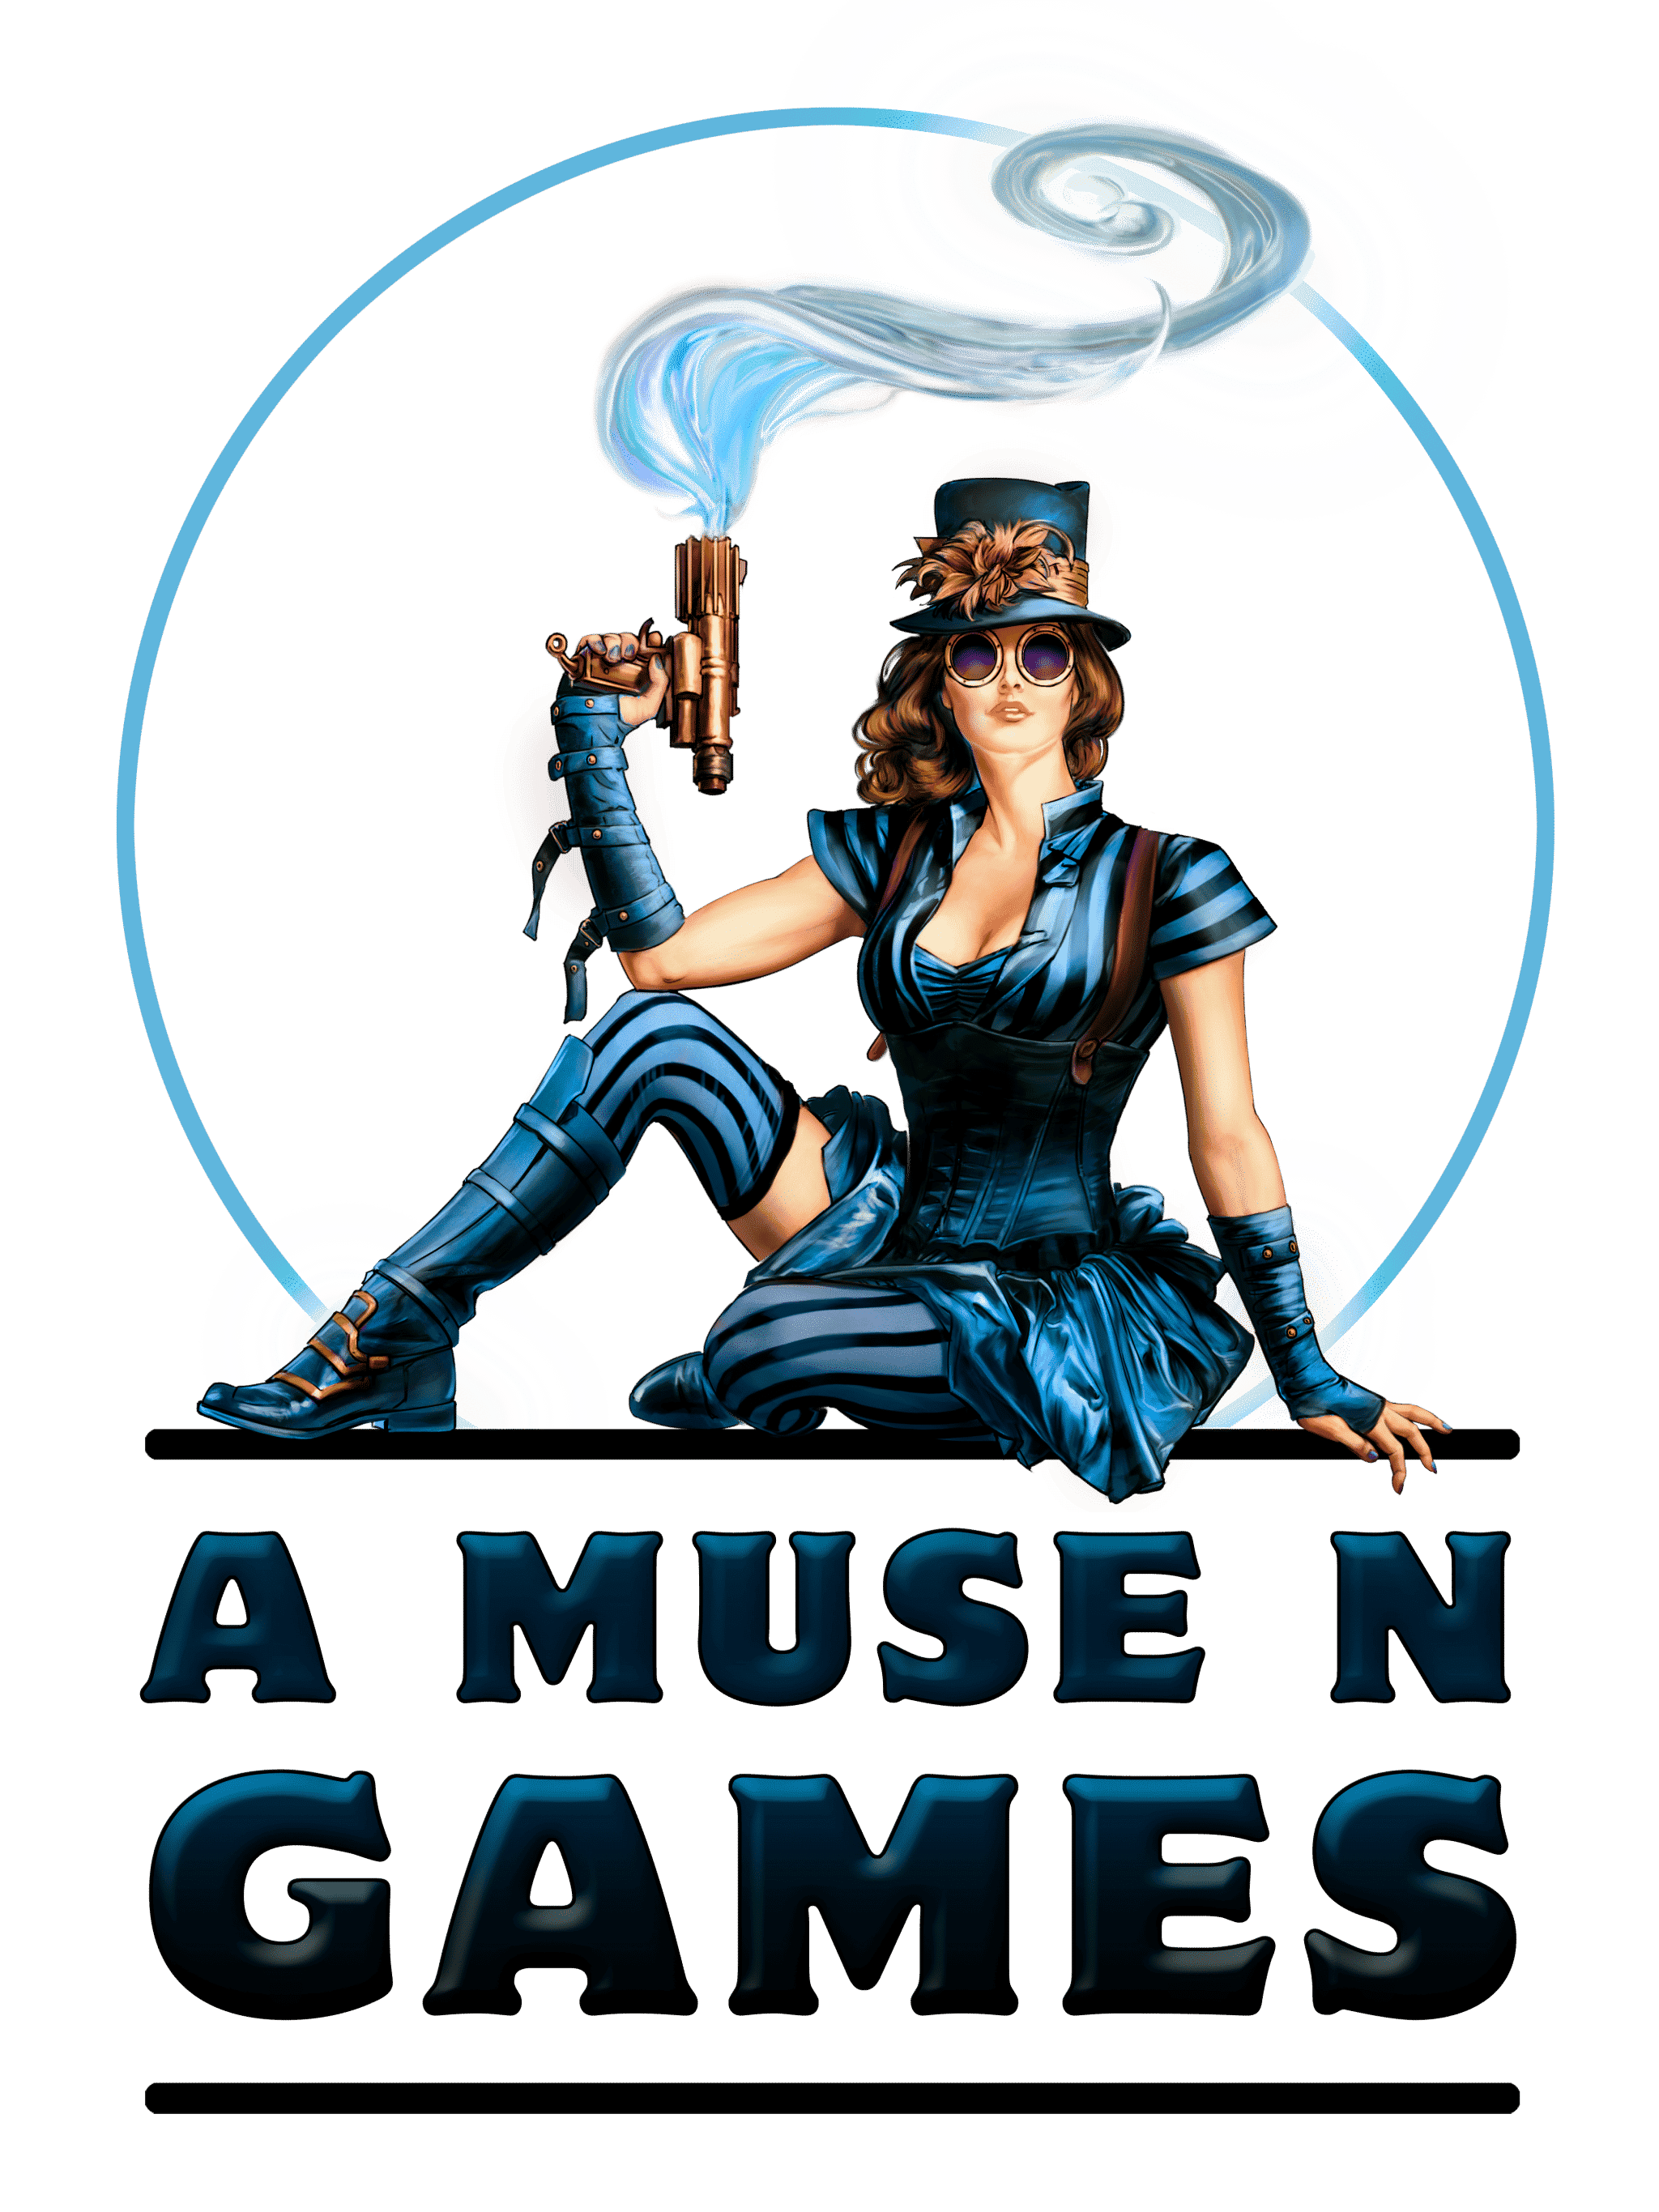 A Muse N Games